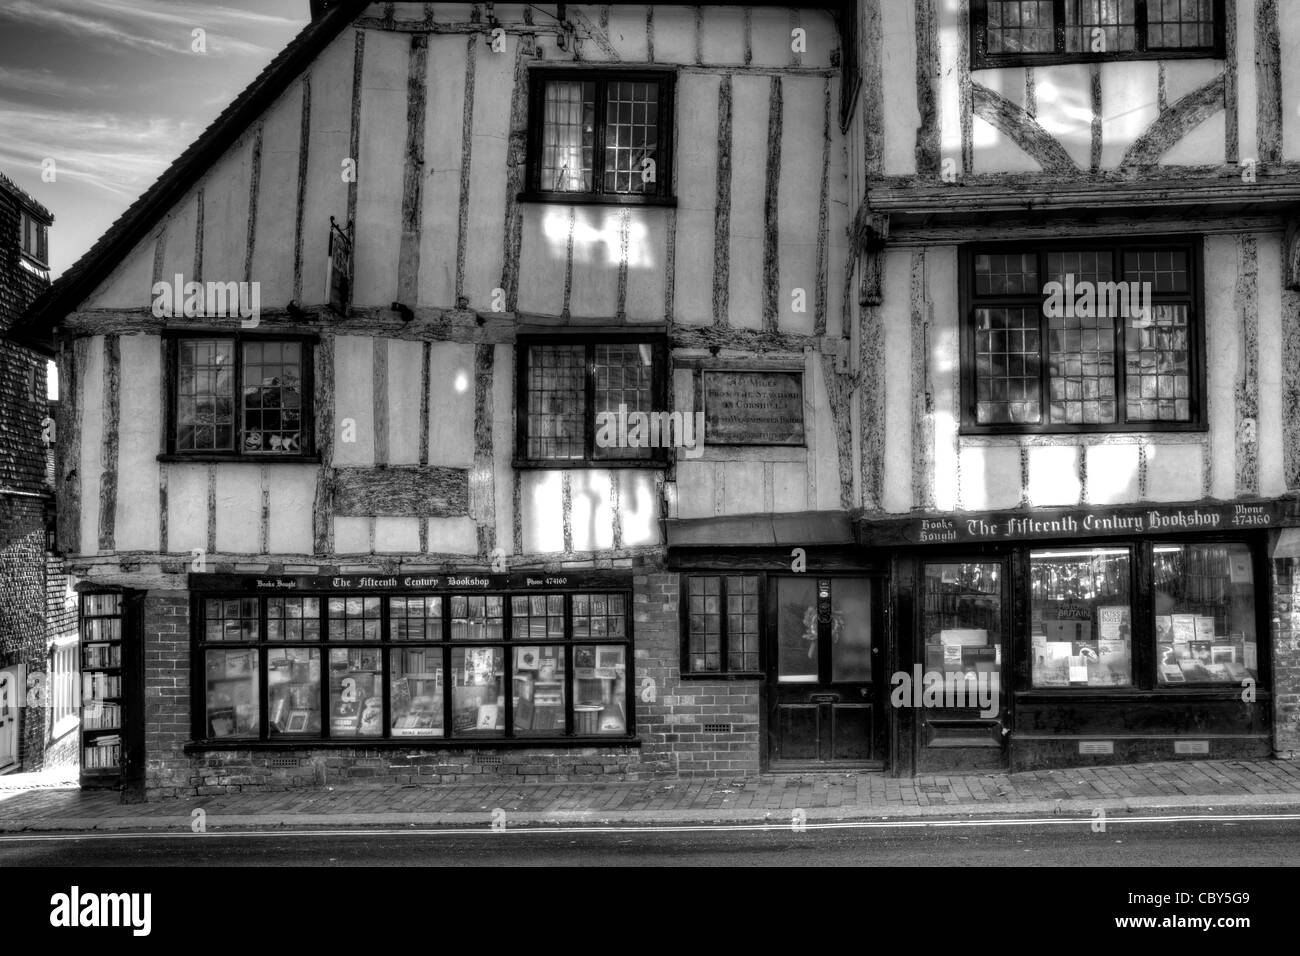 The Fifteenth Century Bookshop, High Street, Lewes, Sussex, England, Stock Photo